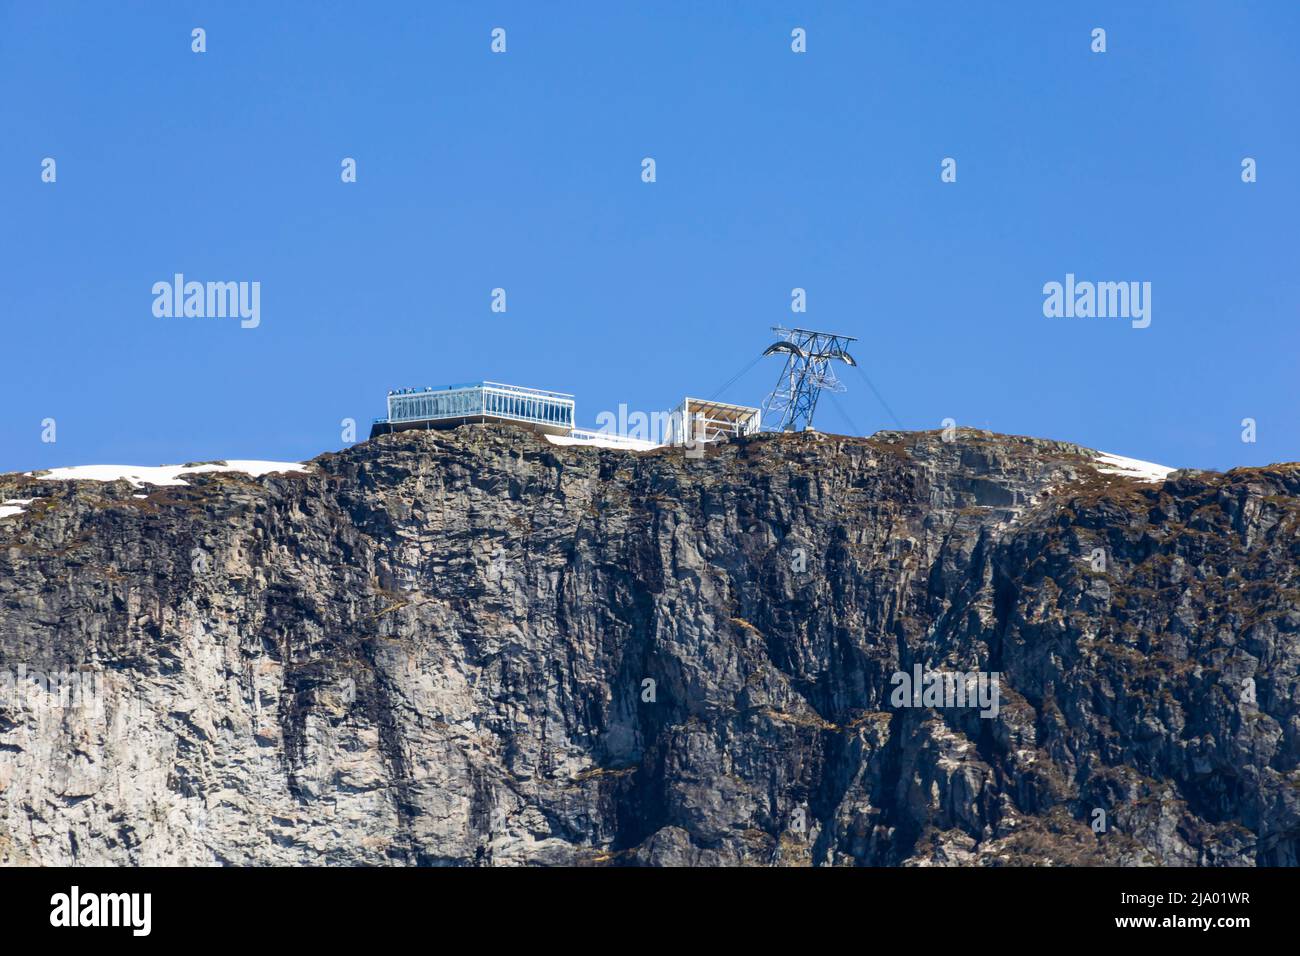 Loen Skylift cable car mountain station on Mount Hoven, above Lake Lovatnet, Norway Stock Photo